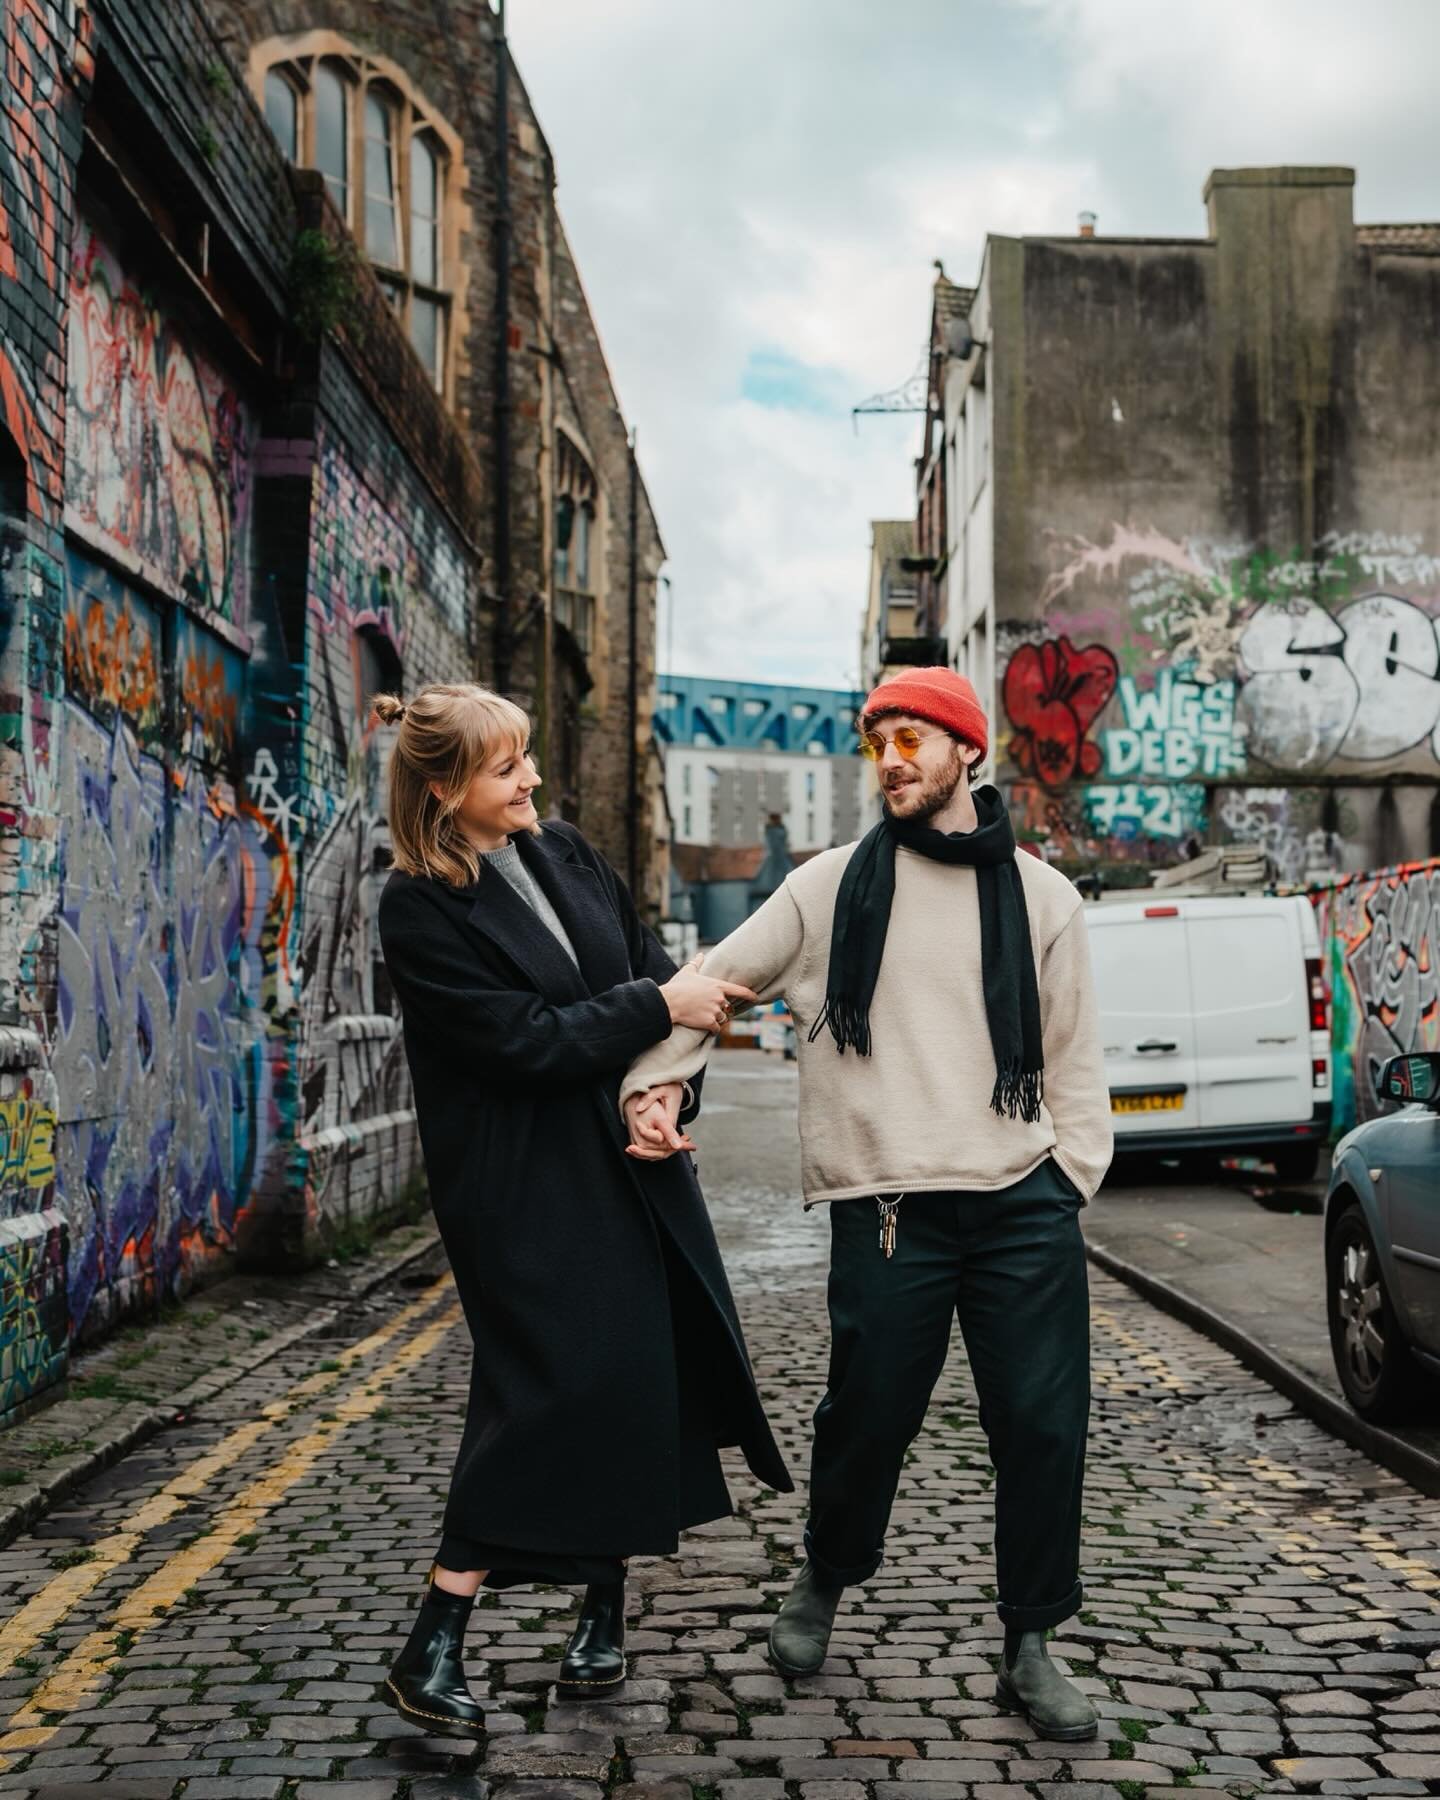 Amber &amp; Jordan | Engagement session in Stokes Croft

What a way to spend a Saturday morning in Bristol, spotting graffiti and chatting about wedding plans. Engagement photos aren&rsquo;t just a way of capturing your excitement in the lead up to y